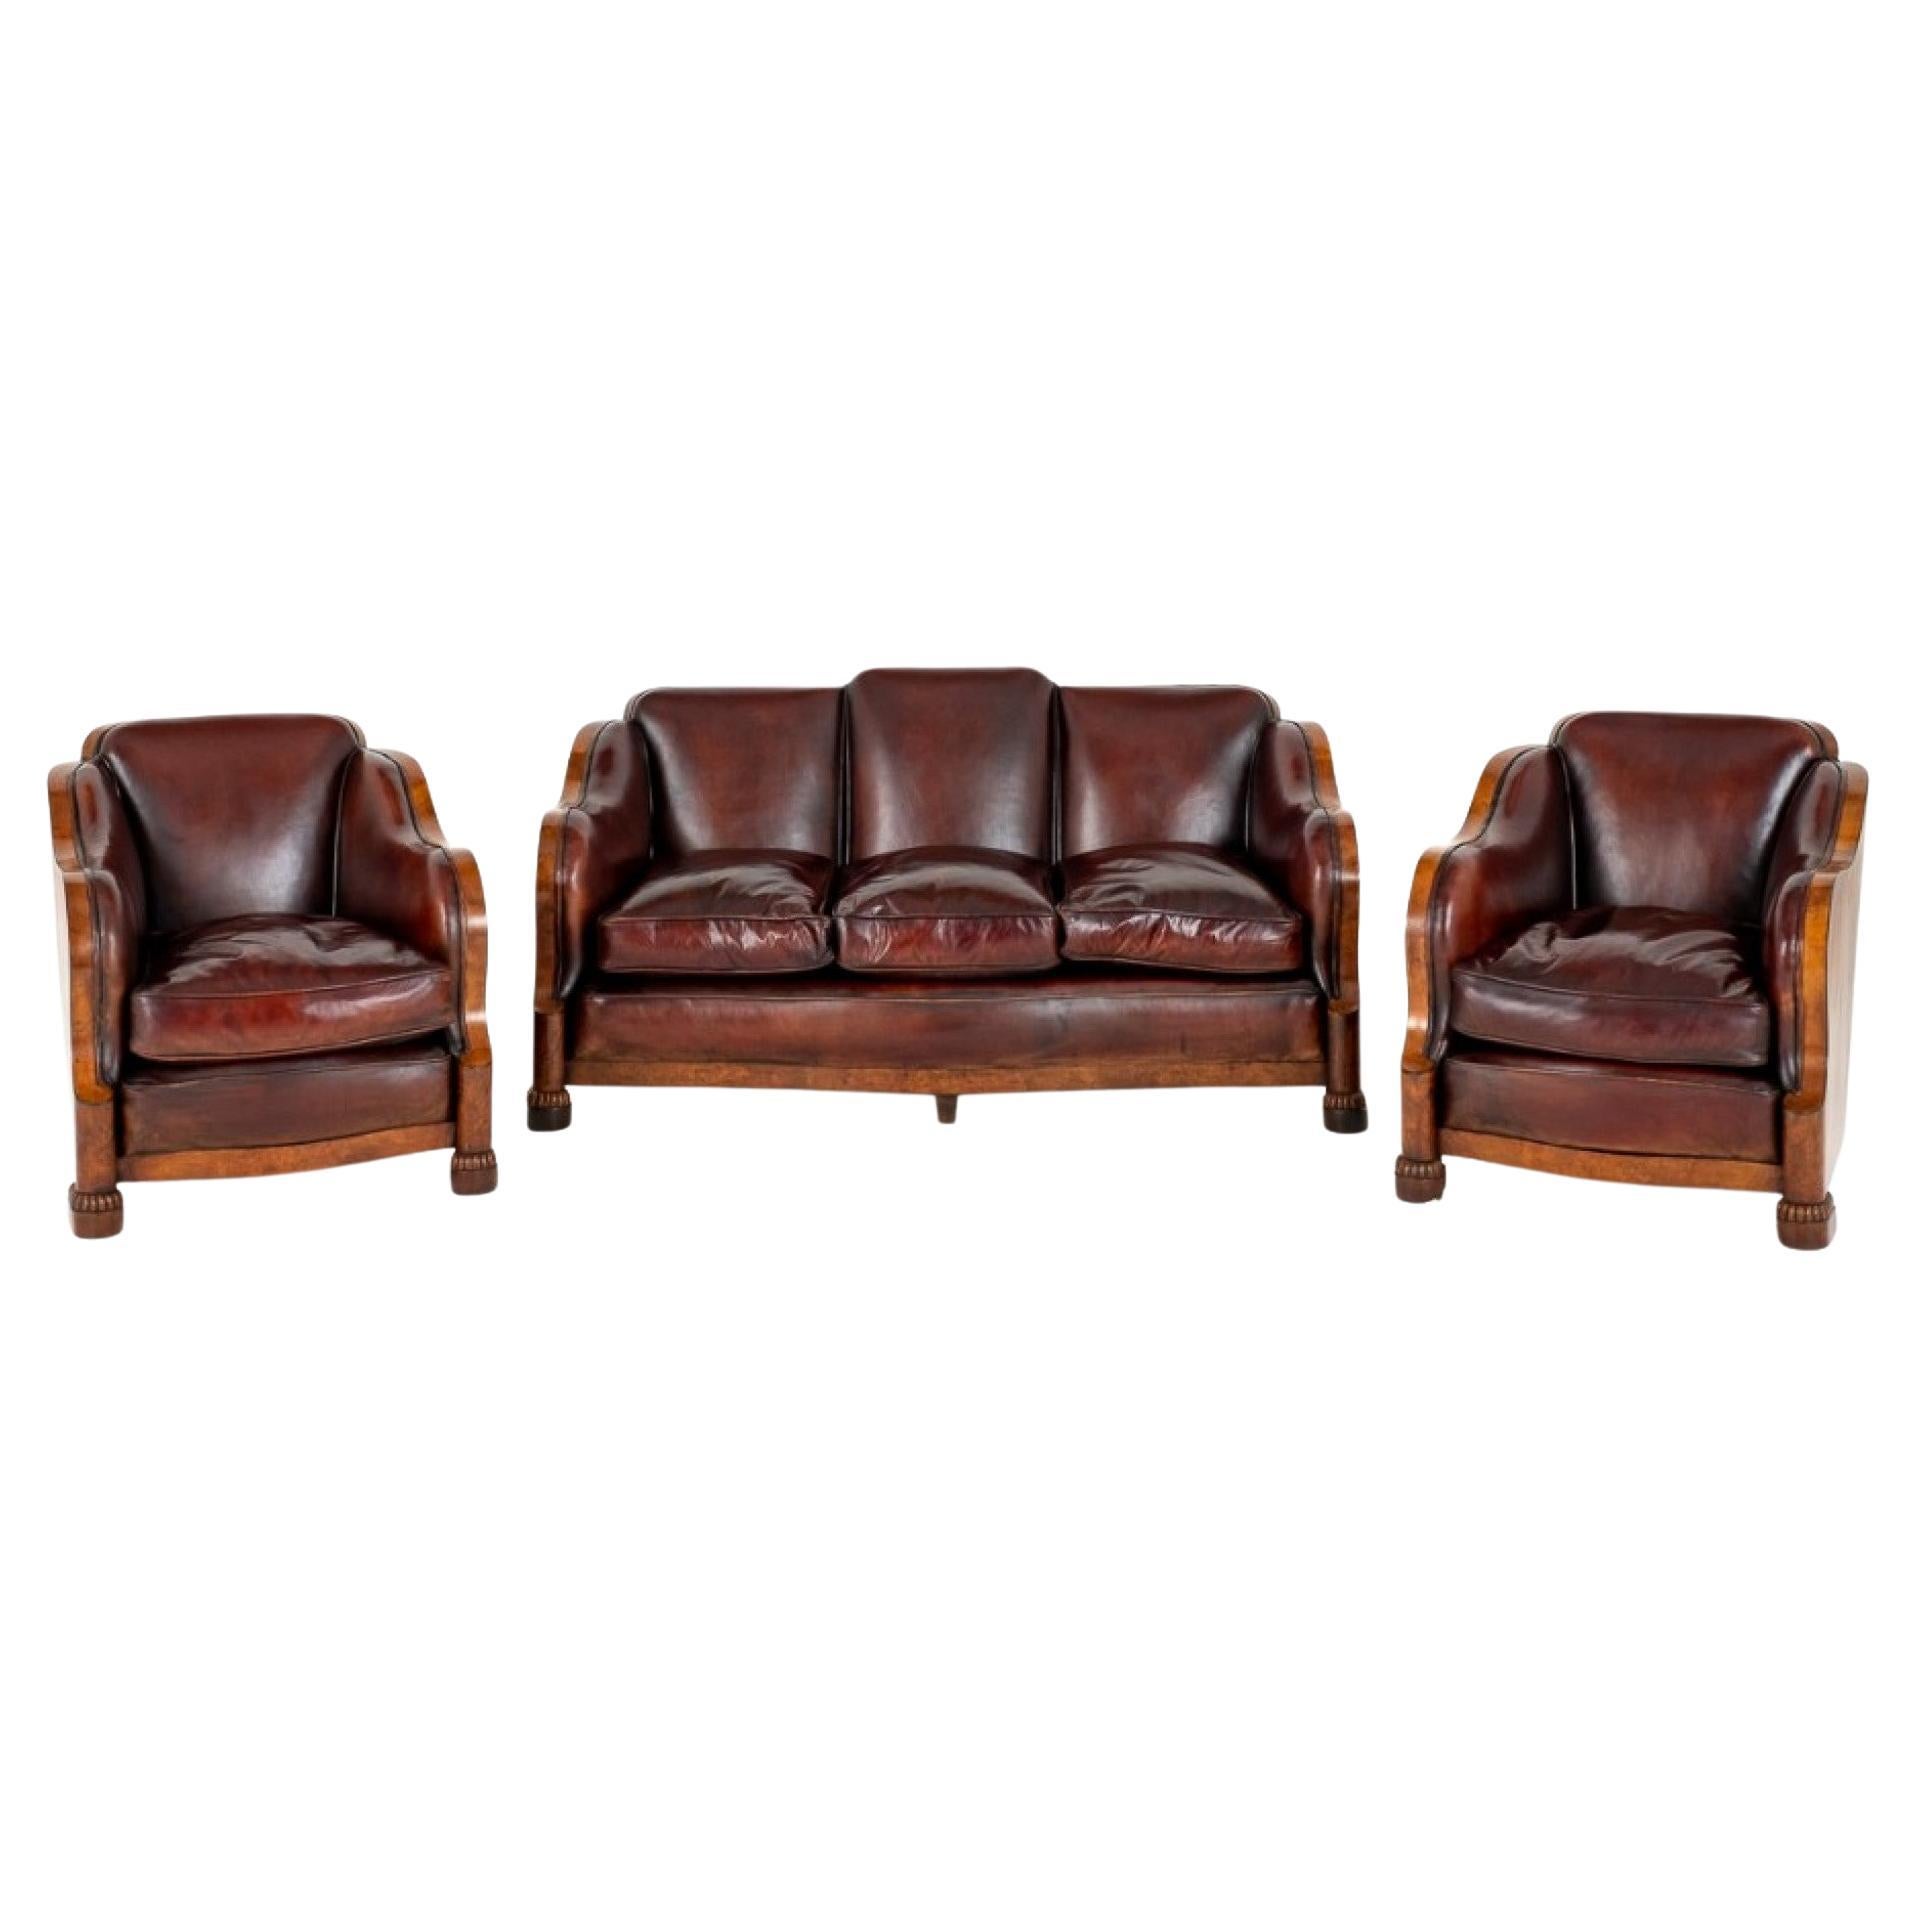 Art Deco Cloud Suite Club Chairs Couch Period, 1930 For Sale